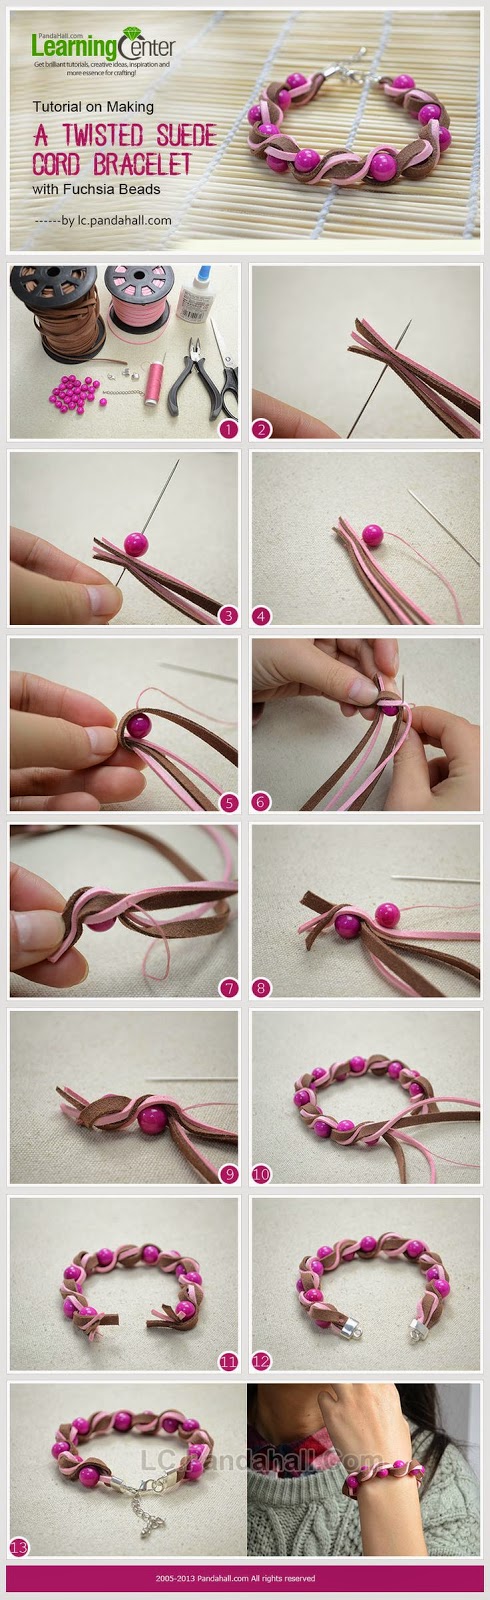 Twisted Suede Cord Bracelet with Fuchsia Beads